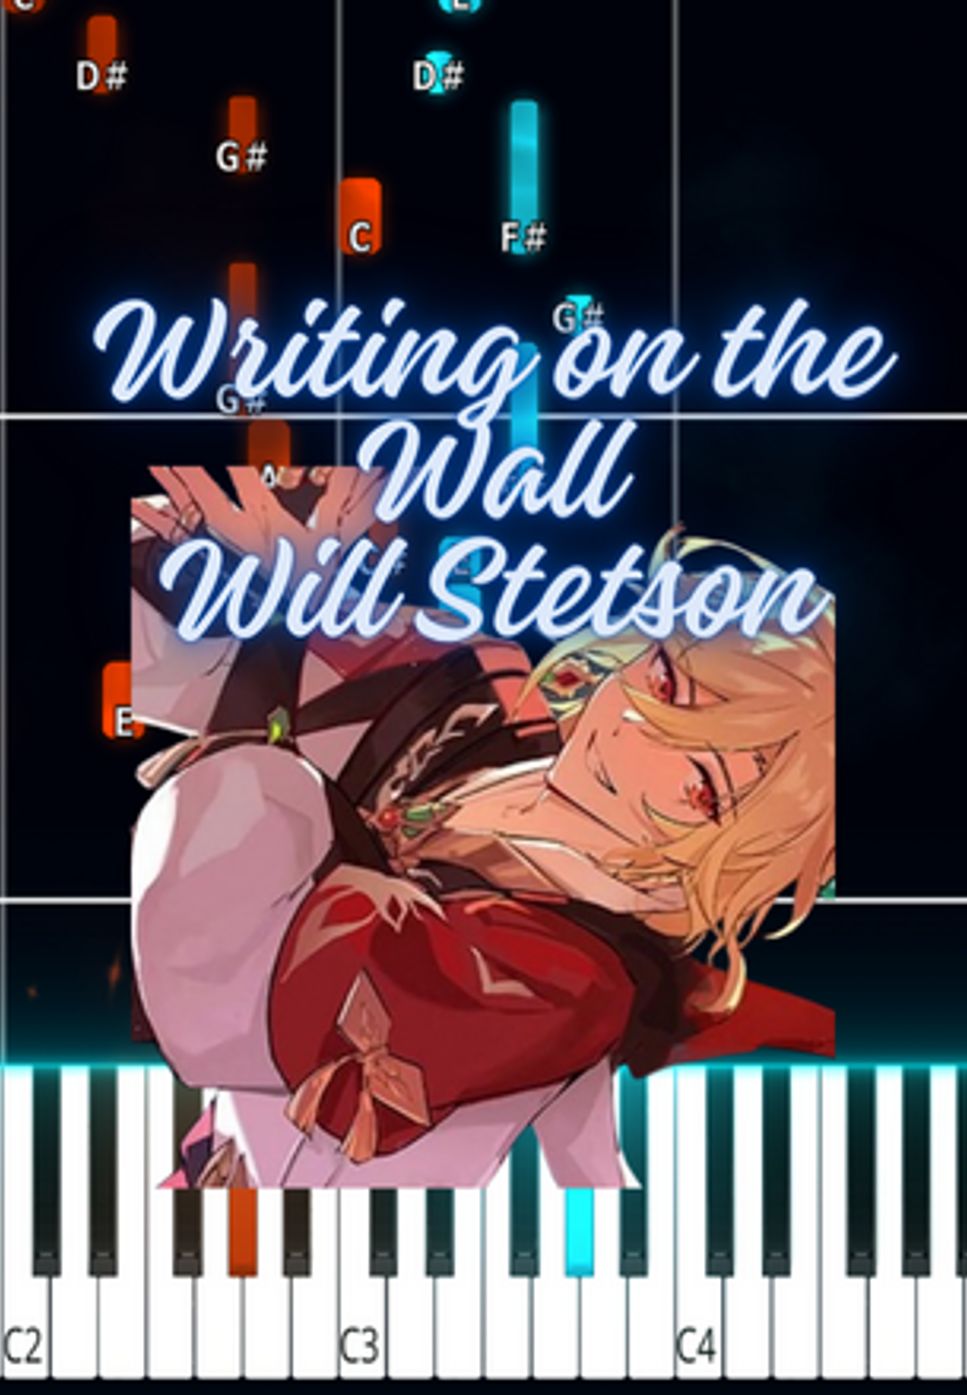 Will Stetson - Writing on the Wall by Marco D.